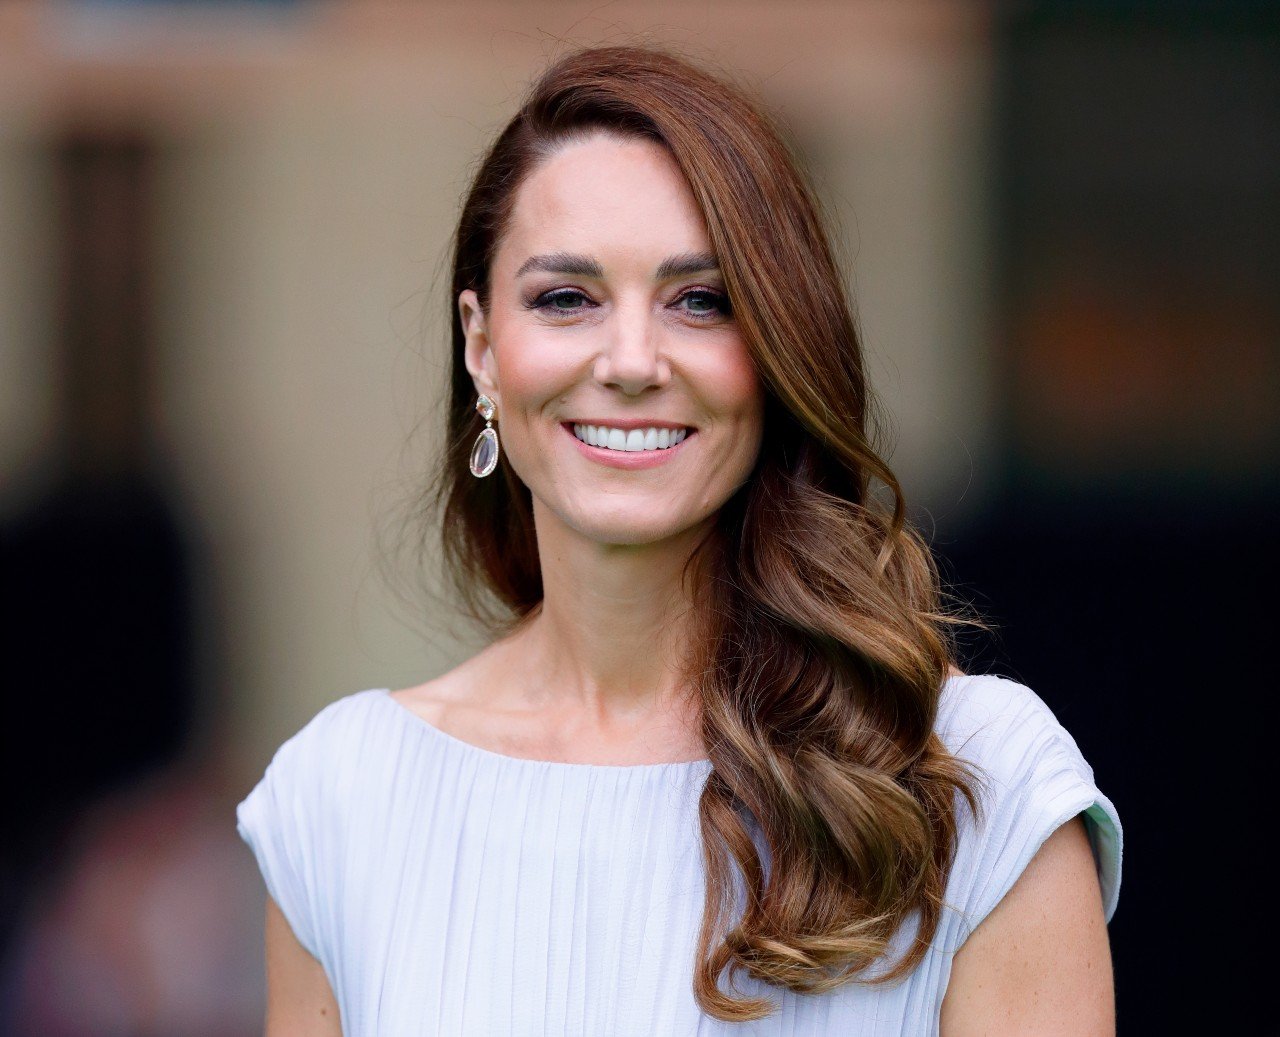 Kate Middleton Once Underwent Emergency Surgery After Discovering a Mass on Her Head